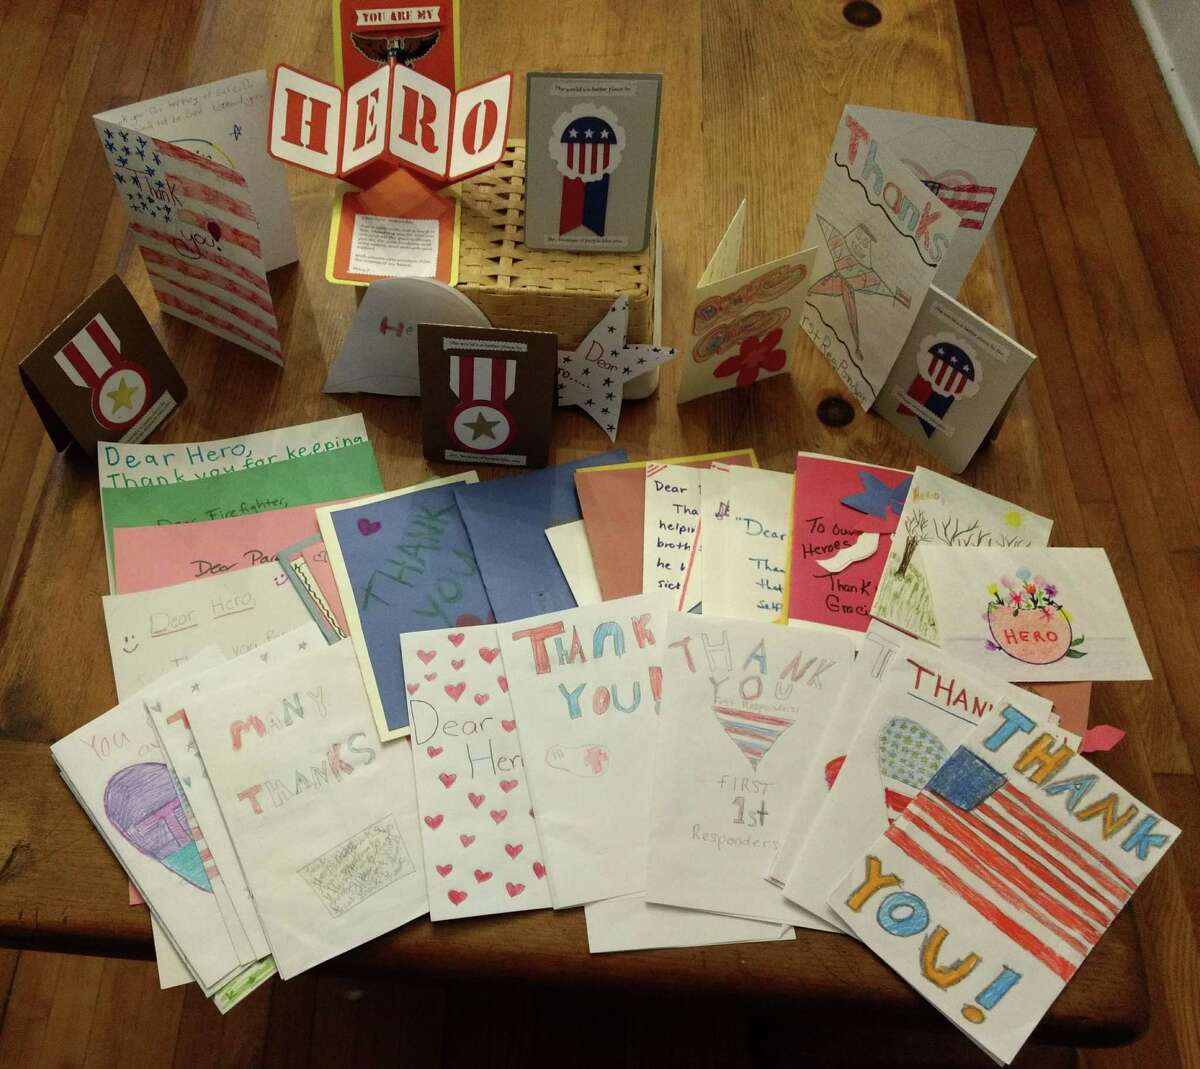 The Norwalk Historical Society mailed dozens of letters and cards to the nonprofit group, Operation Gratitude, which will distribute them as part of care packages to first responders throughout the country.